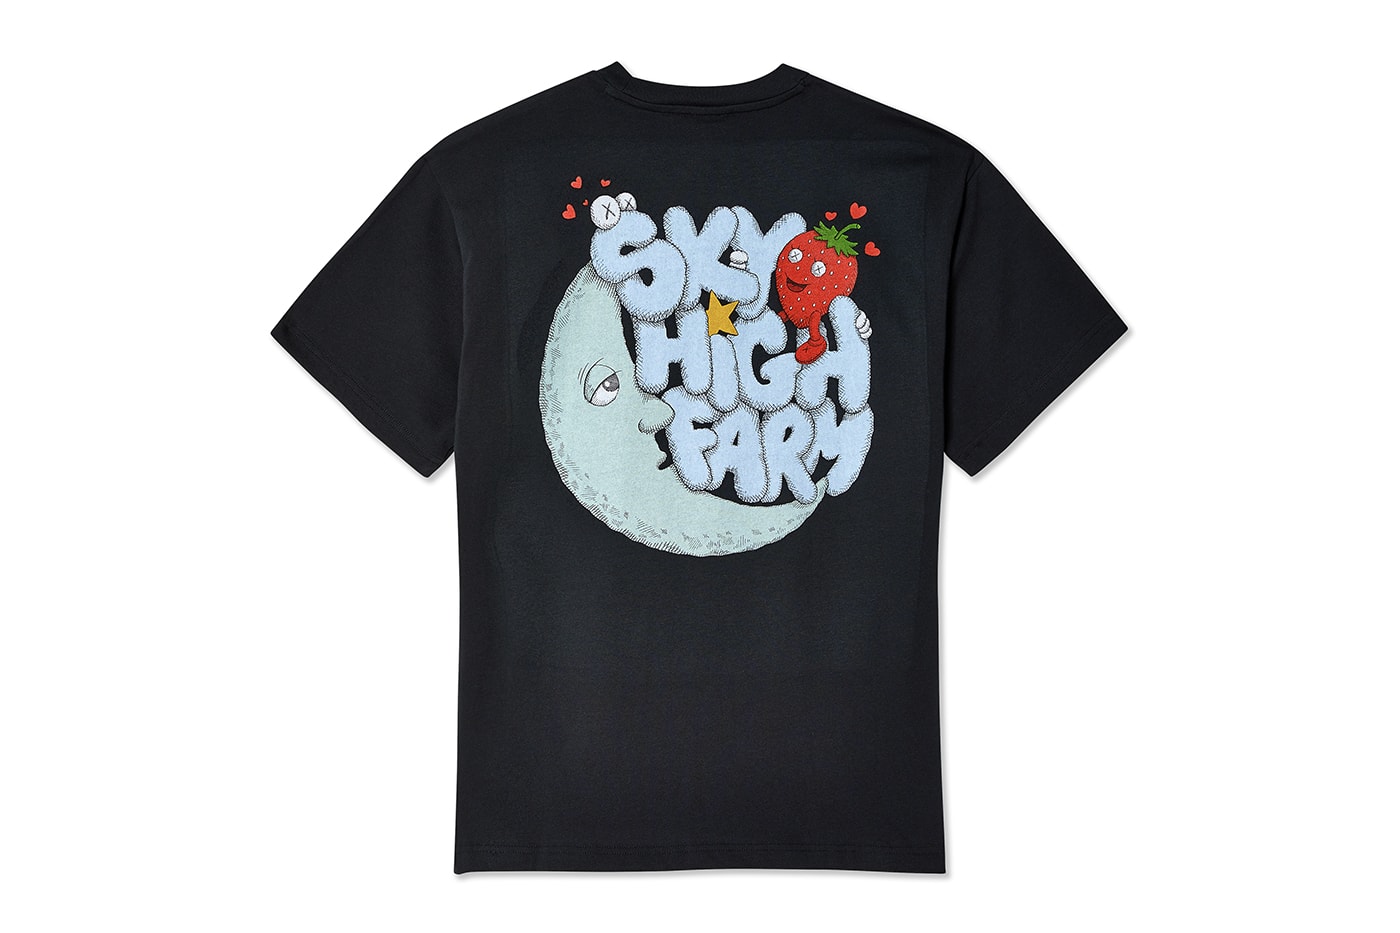 DSMNYの10周年を記念した KAWS x Sky High Farm Workwear x Nike のコラボウェアをチェック Dover Street Market NY Celebrates 10 Years With Limited Edition Sky High Farm Workwear x Nike x KAWS Collab new york shfww shirts nike air force 1 cloud force 1 lqqk arena embroidery hudson valley by made x hudson